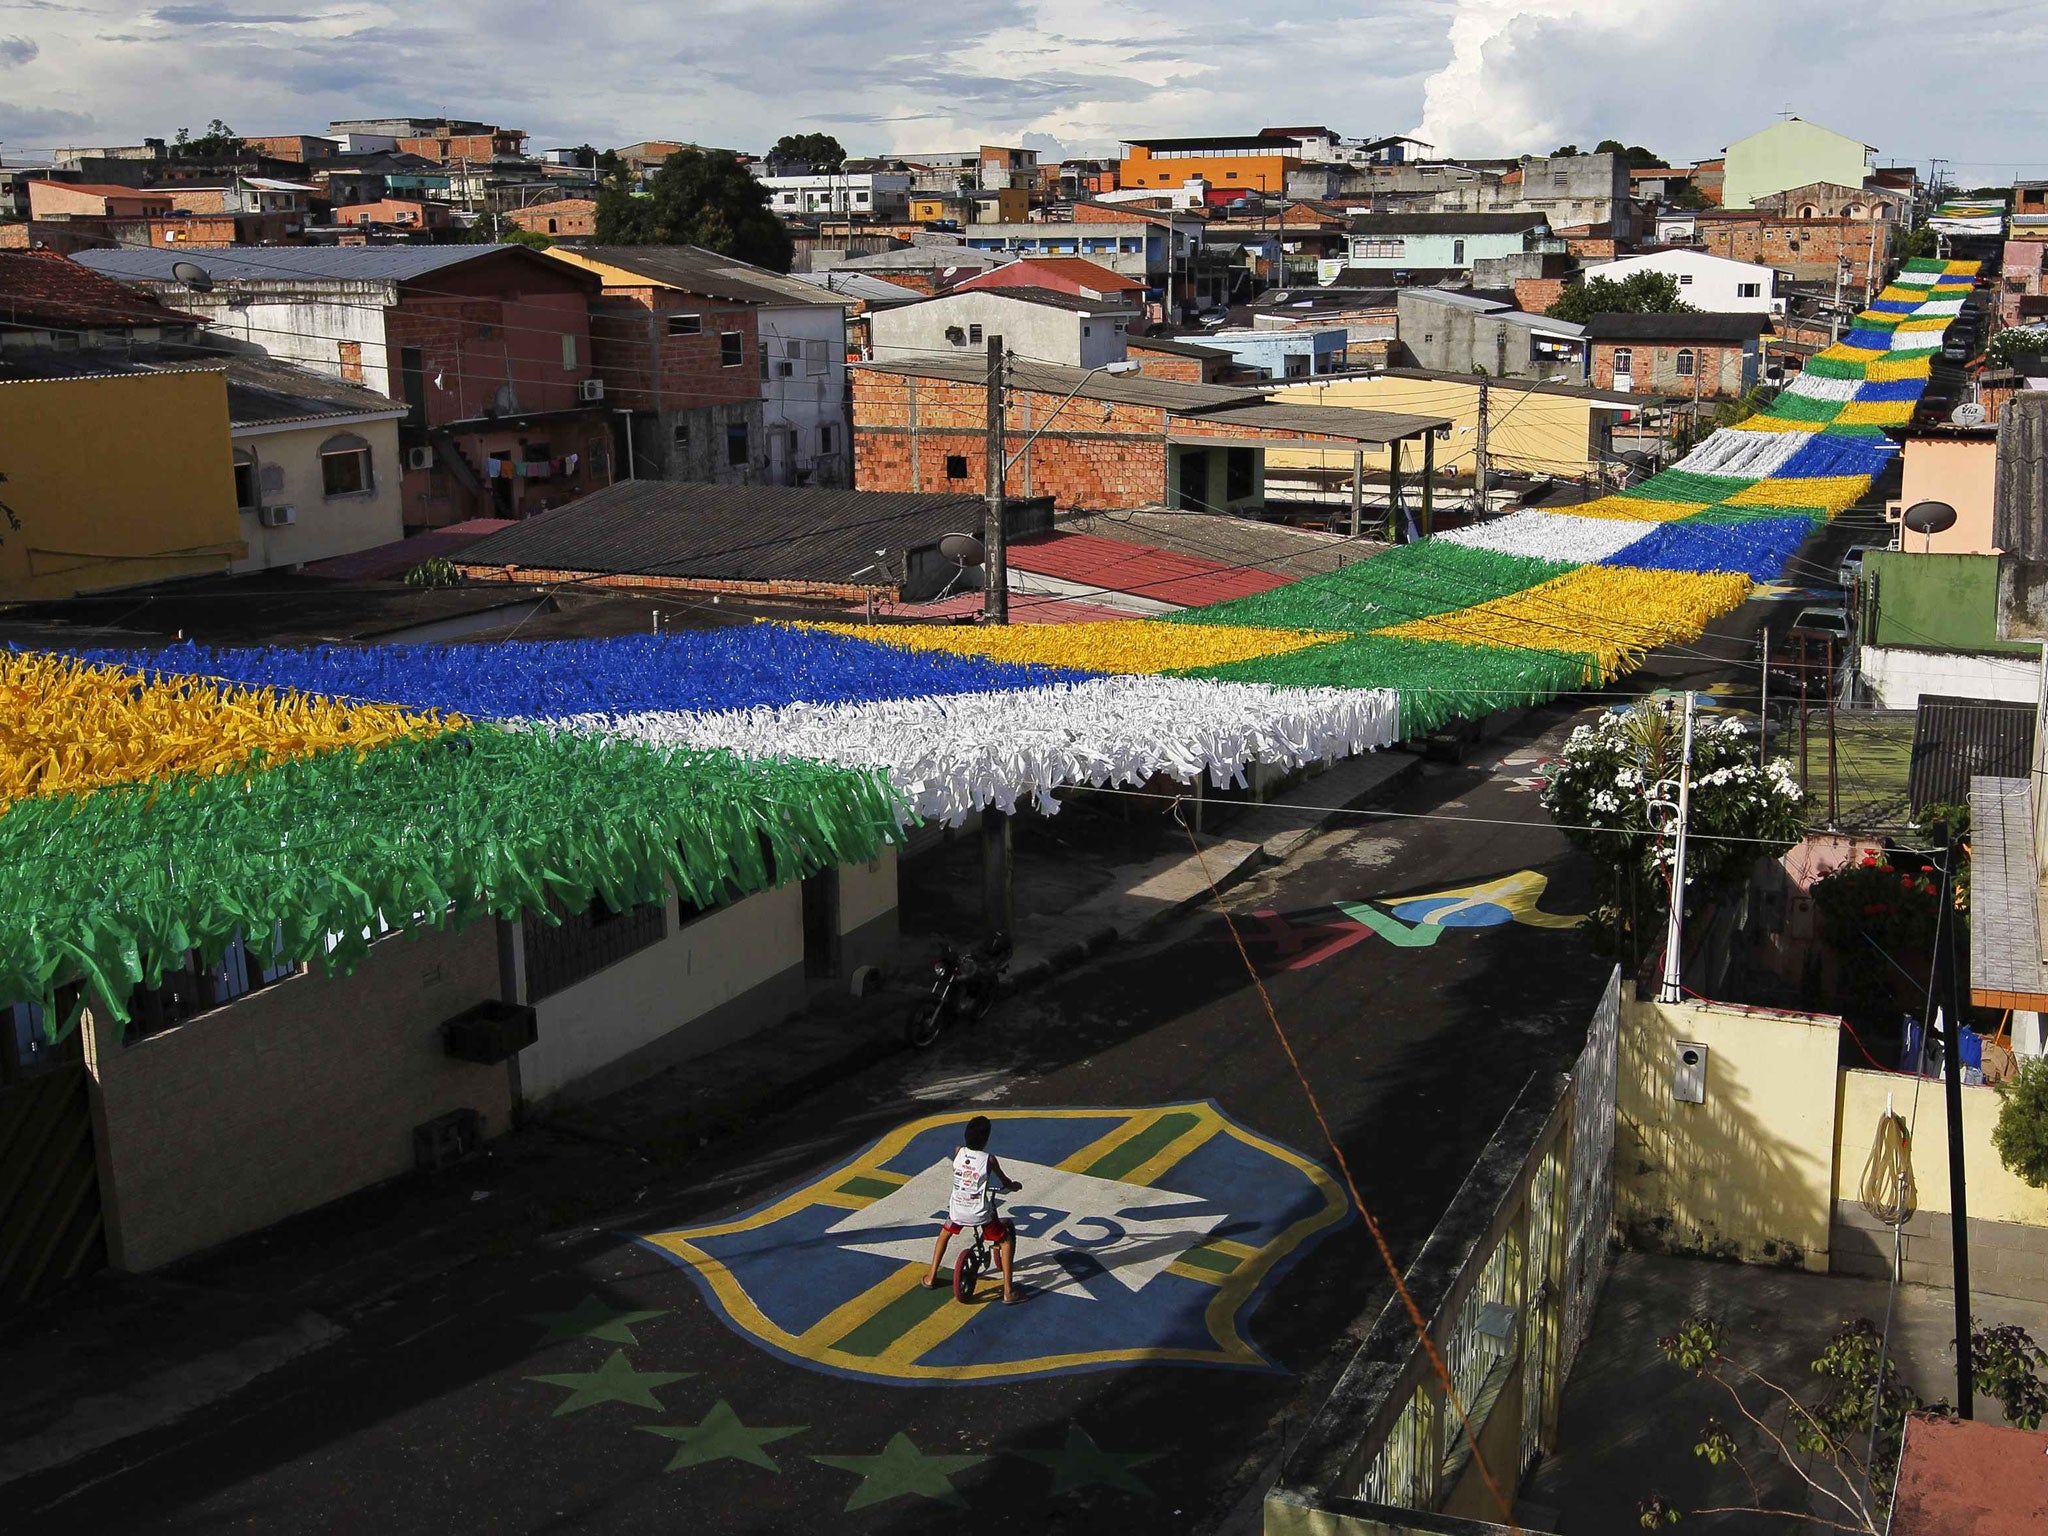 A boy rides his bicycle along Third Street of the Alvorada neighbourhood which is decorated for the 2014 World Cup in Manaus, one of the tournament's host cities